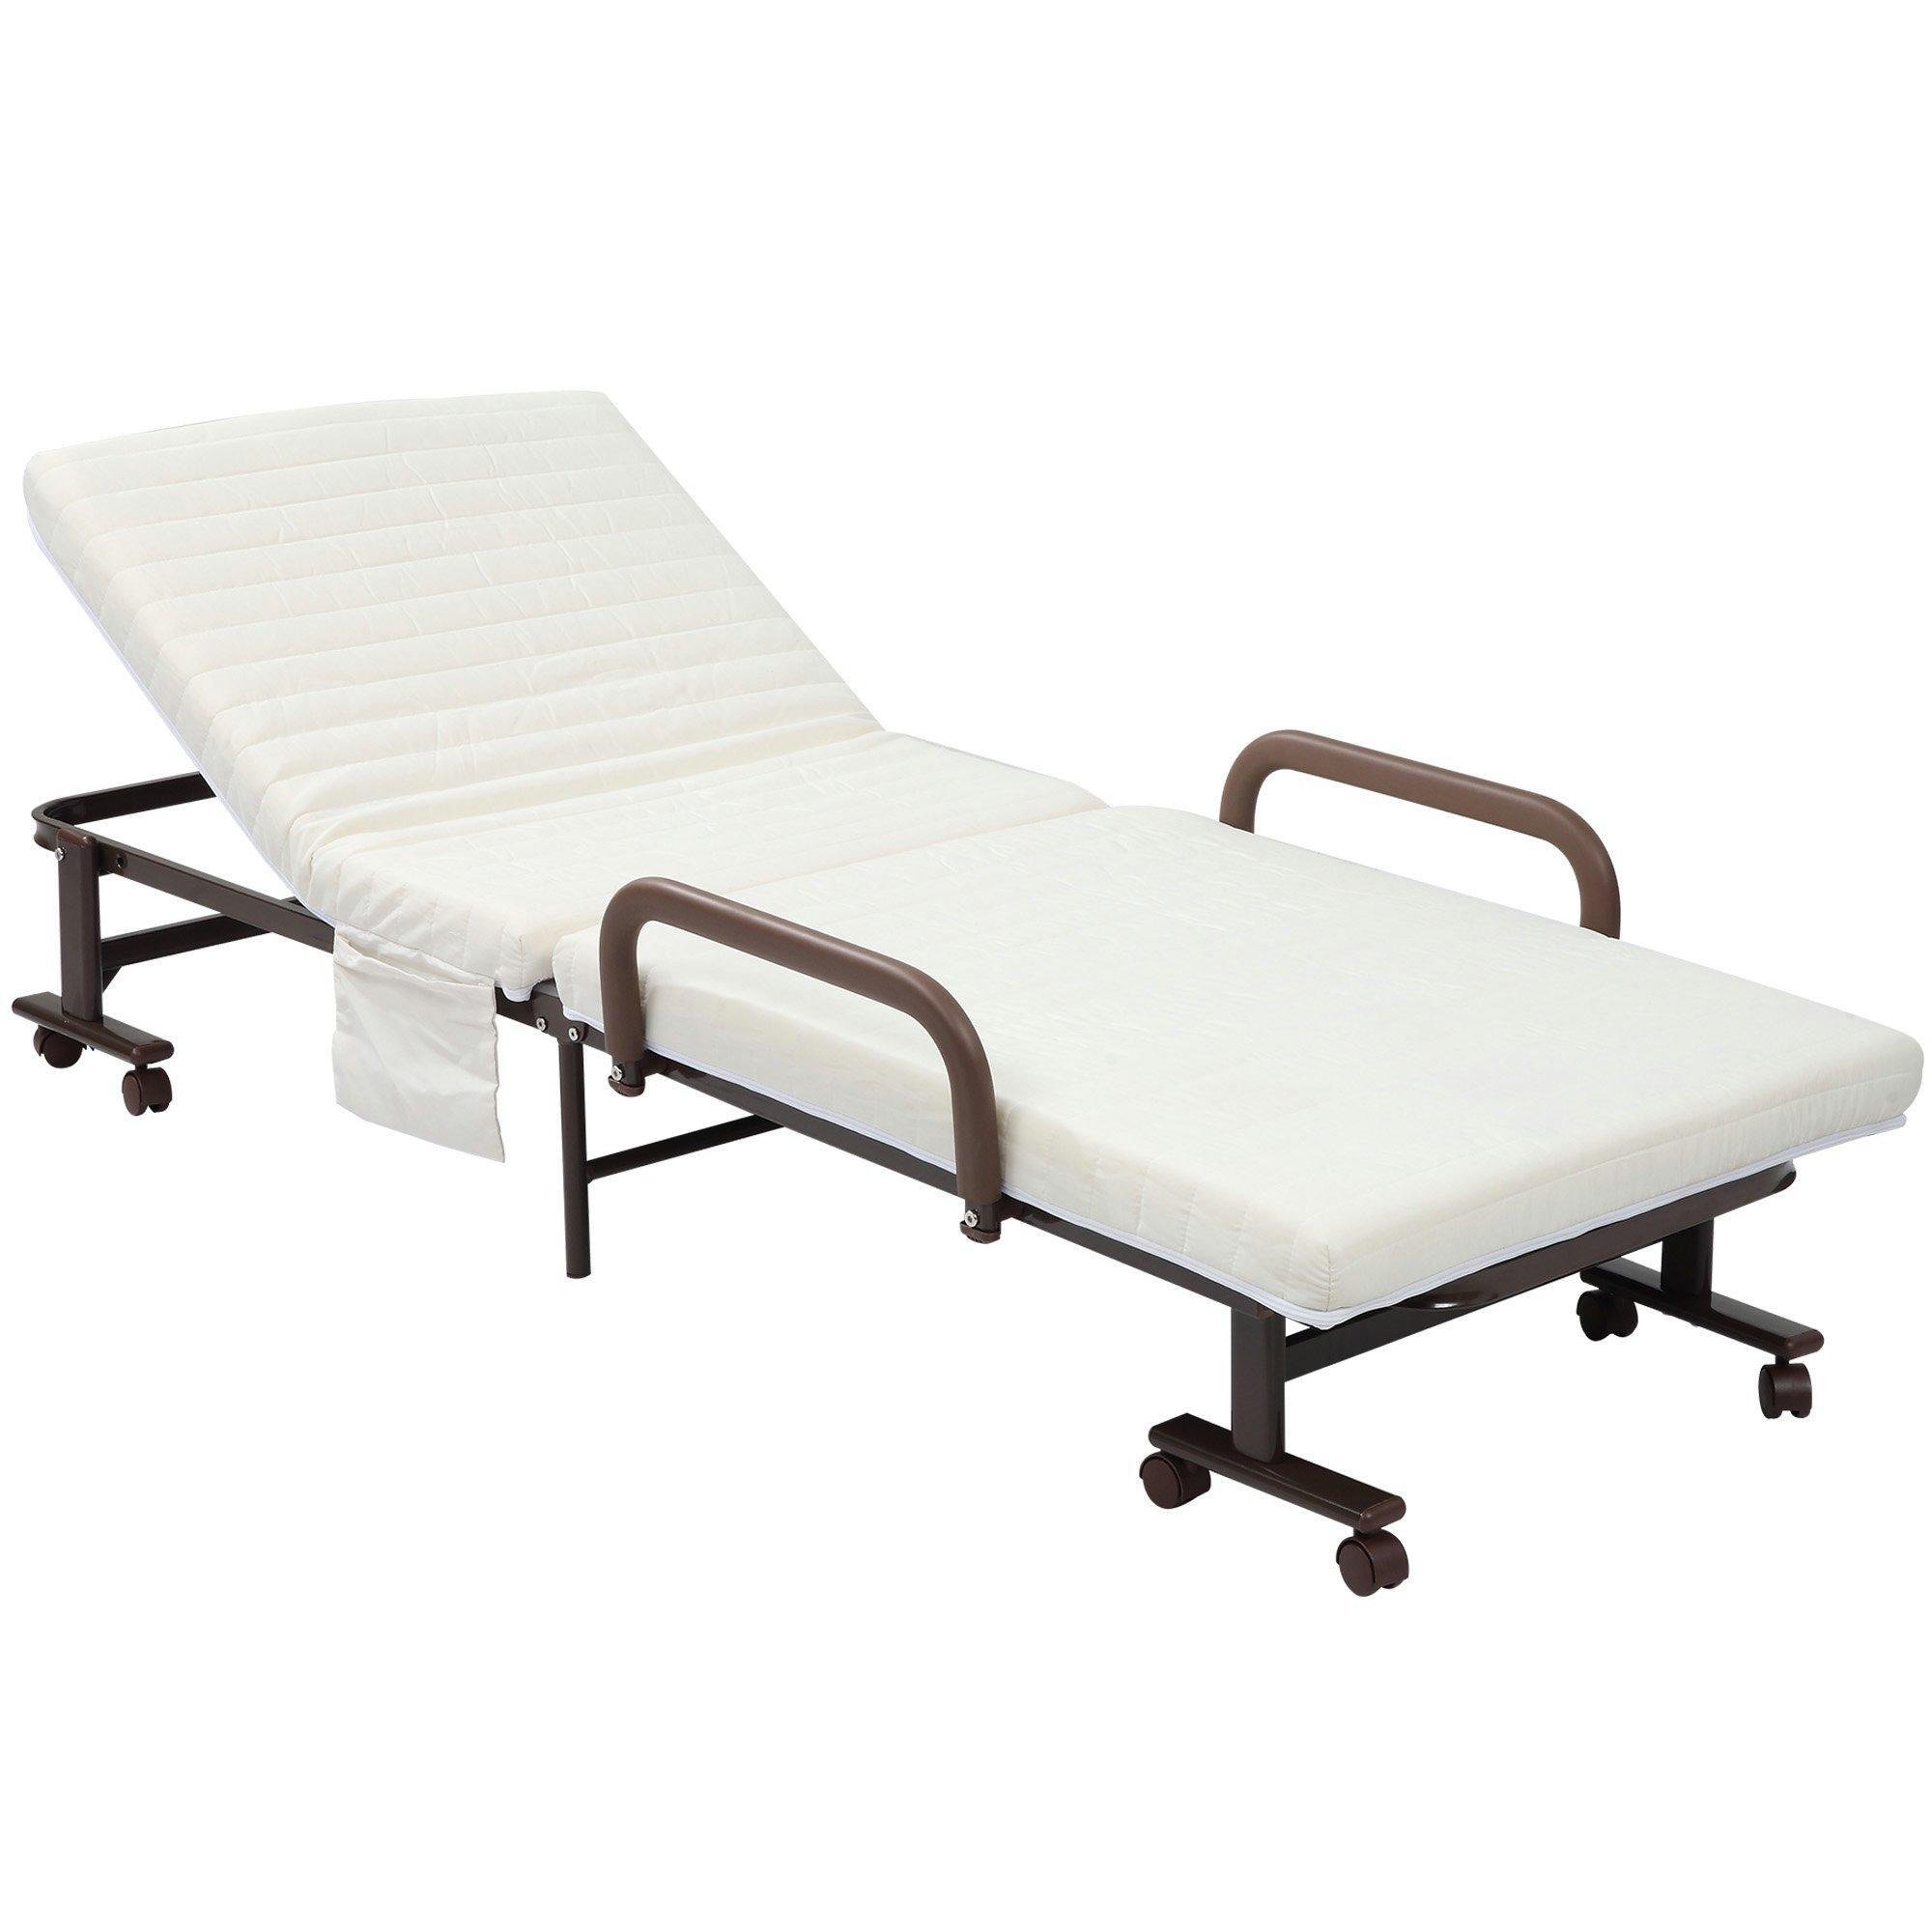 Folding Bed with Mattress Guest Bed with Adjustable Backrest & Wheels - image 1